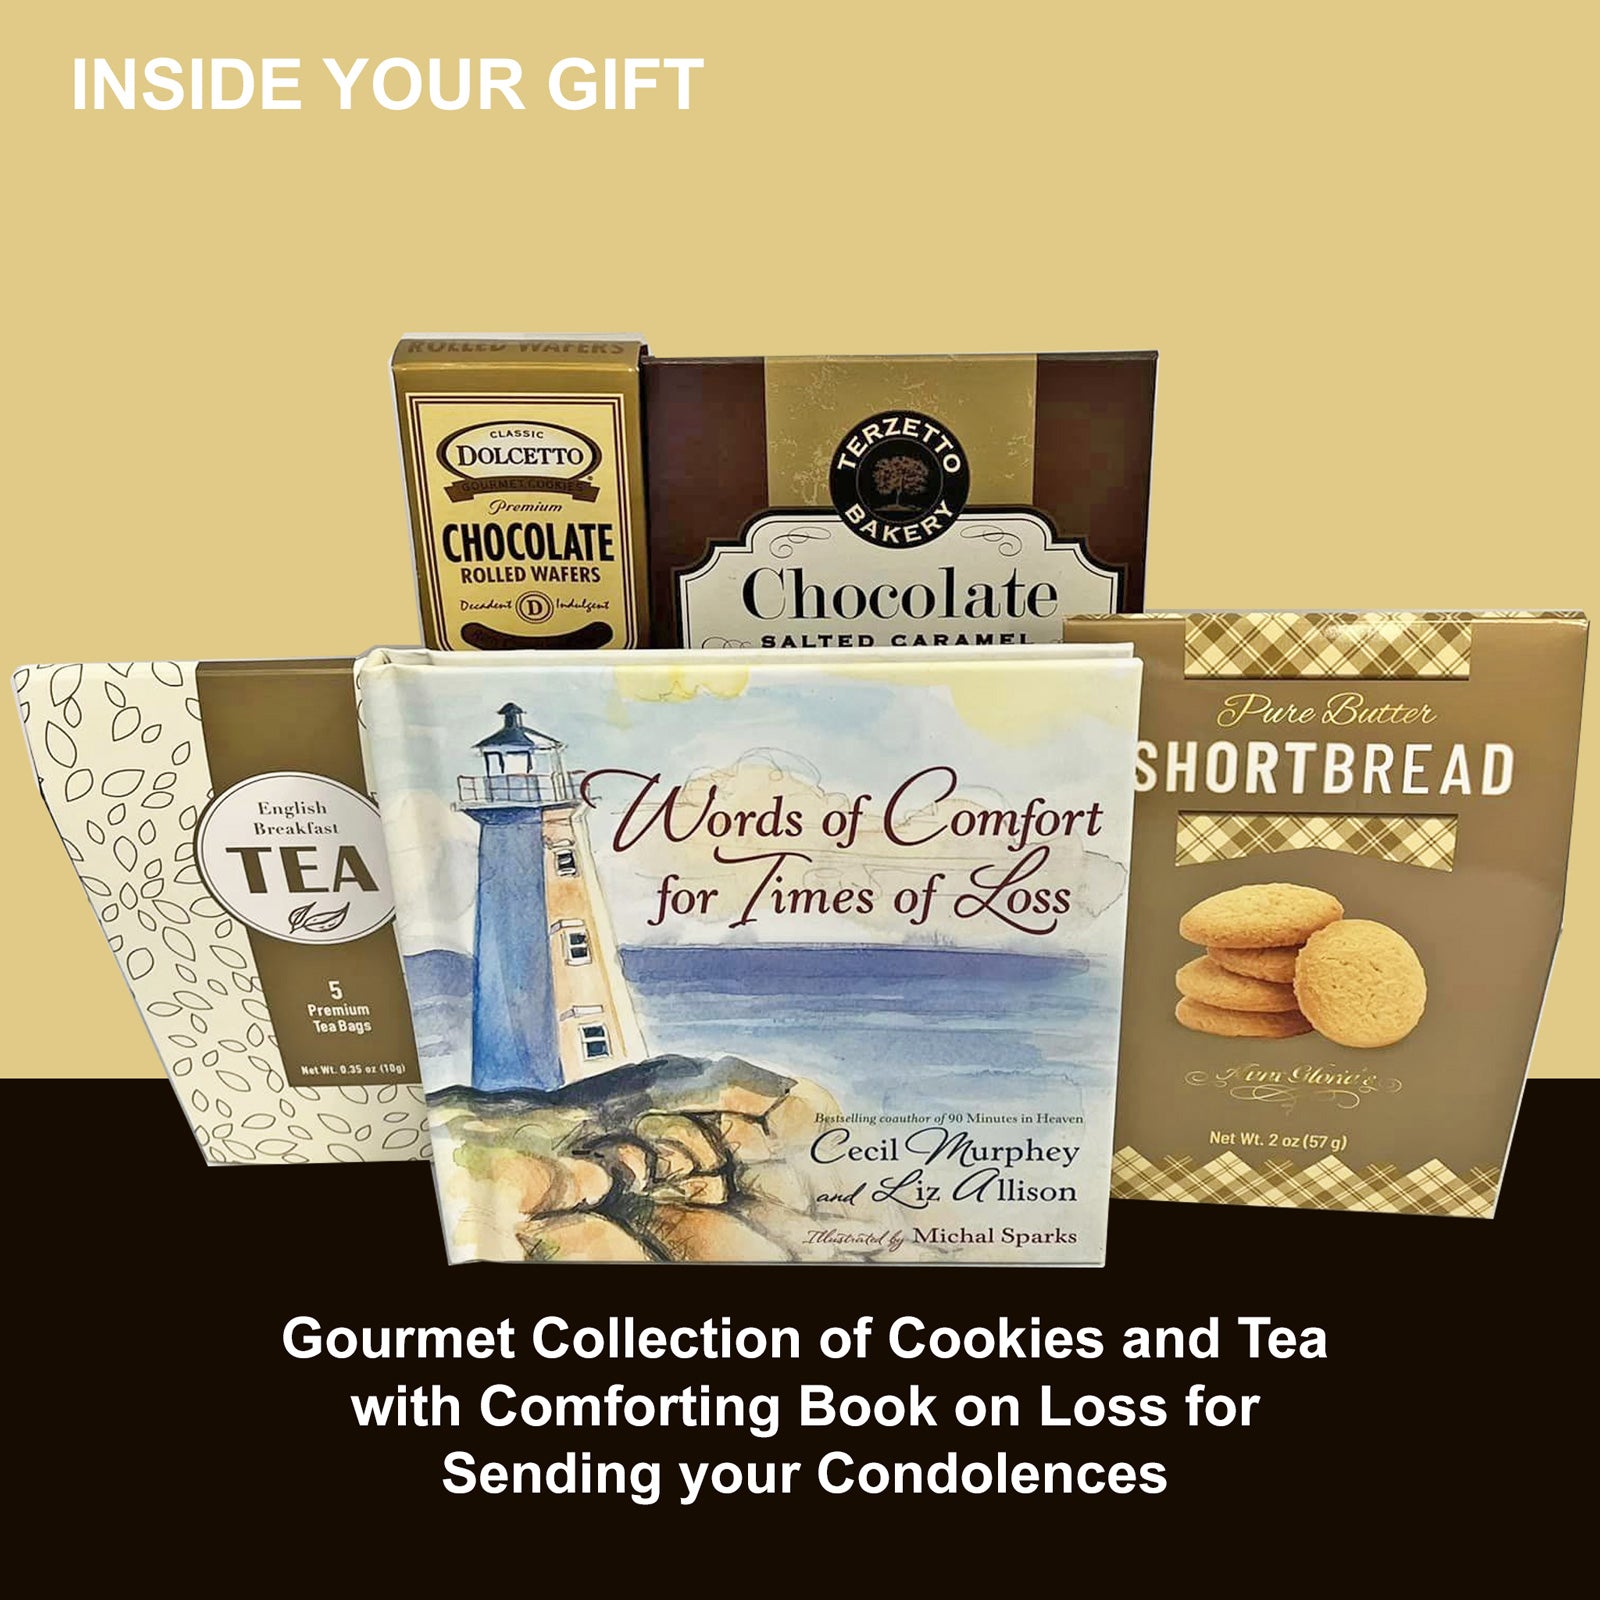 Words of Comfort Sympathy Gift Basket with Tea, Cookies and Consoling Gift Book